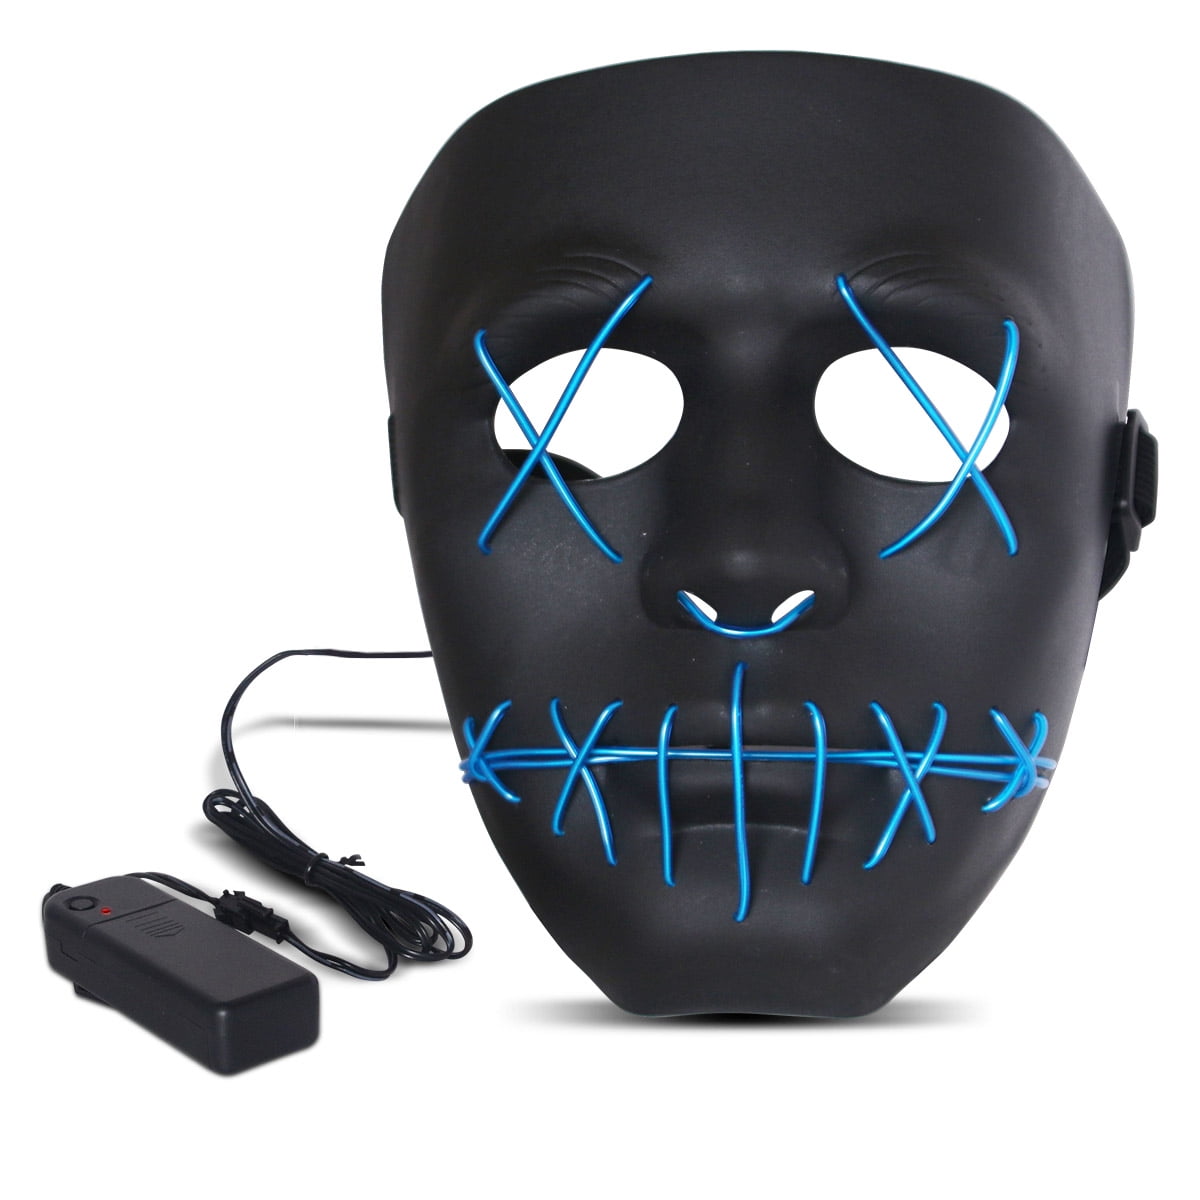 El Wire Light Up LED Mask 3 Modes Full Face Mask Costume Cosplay Party Mask Toy 